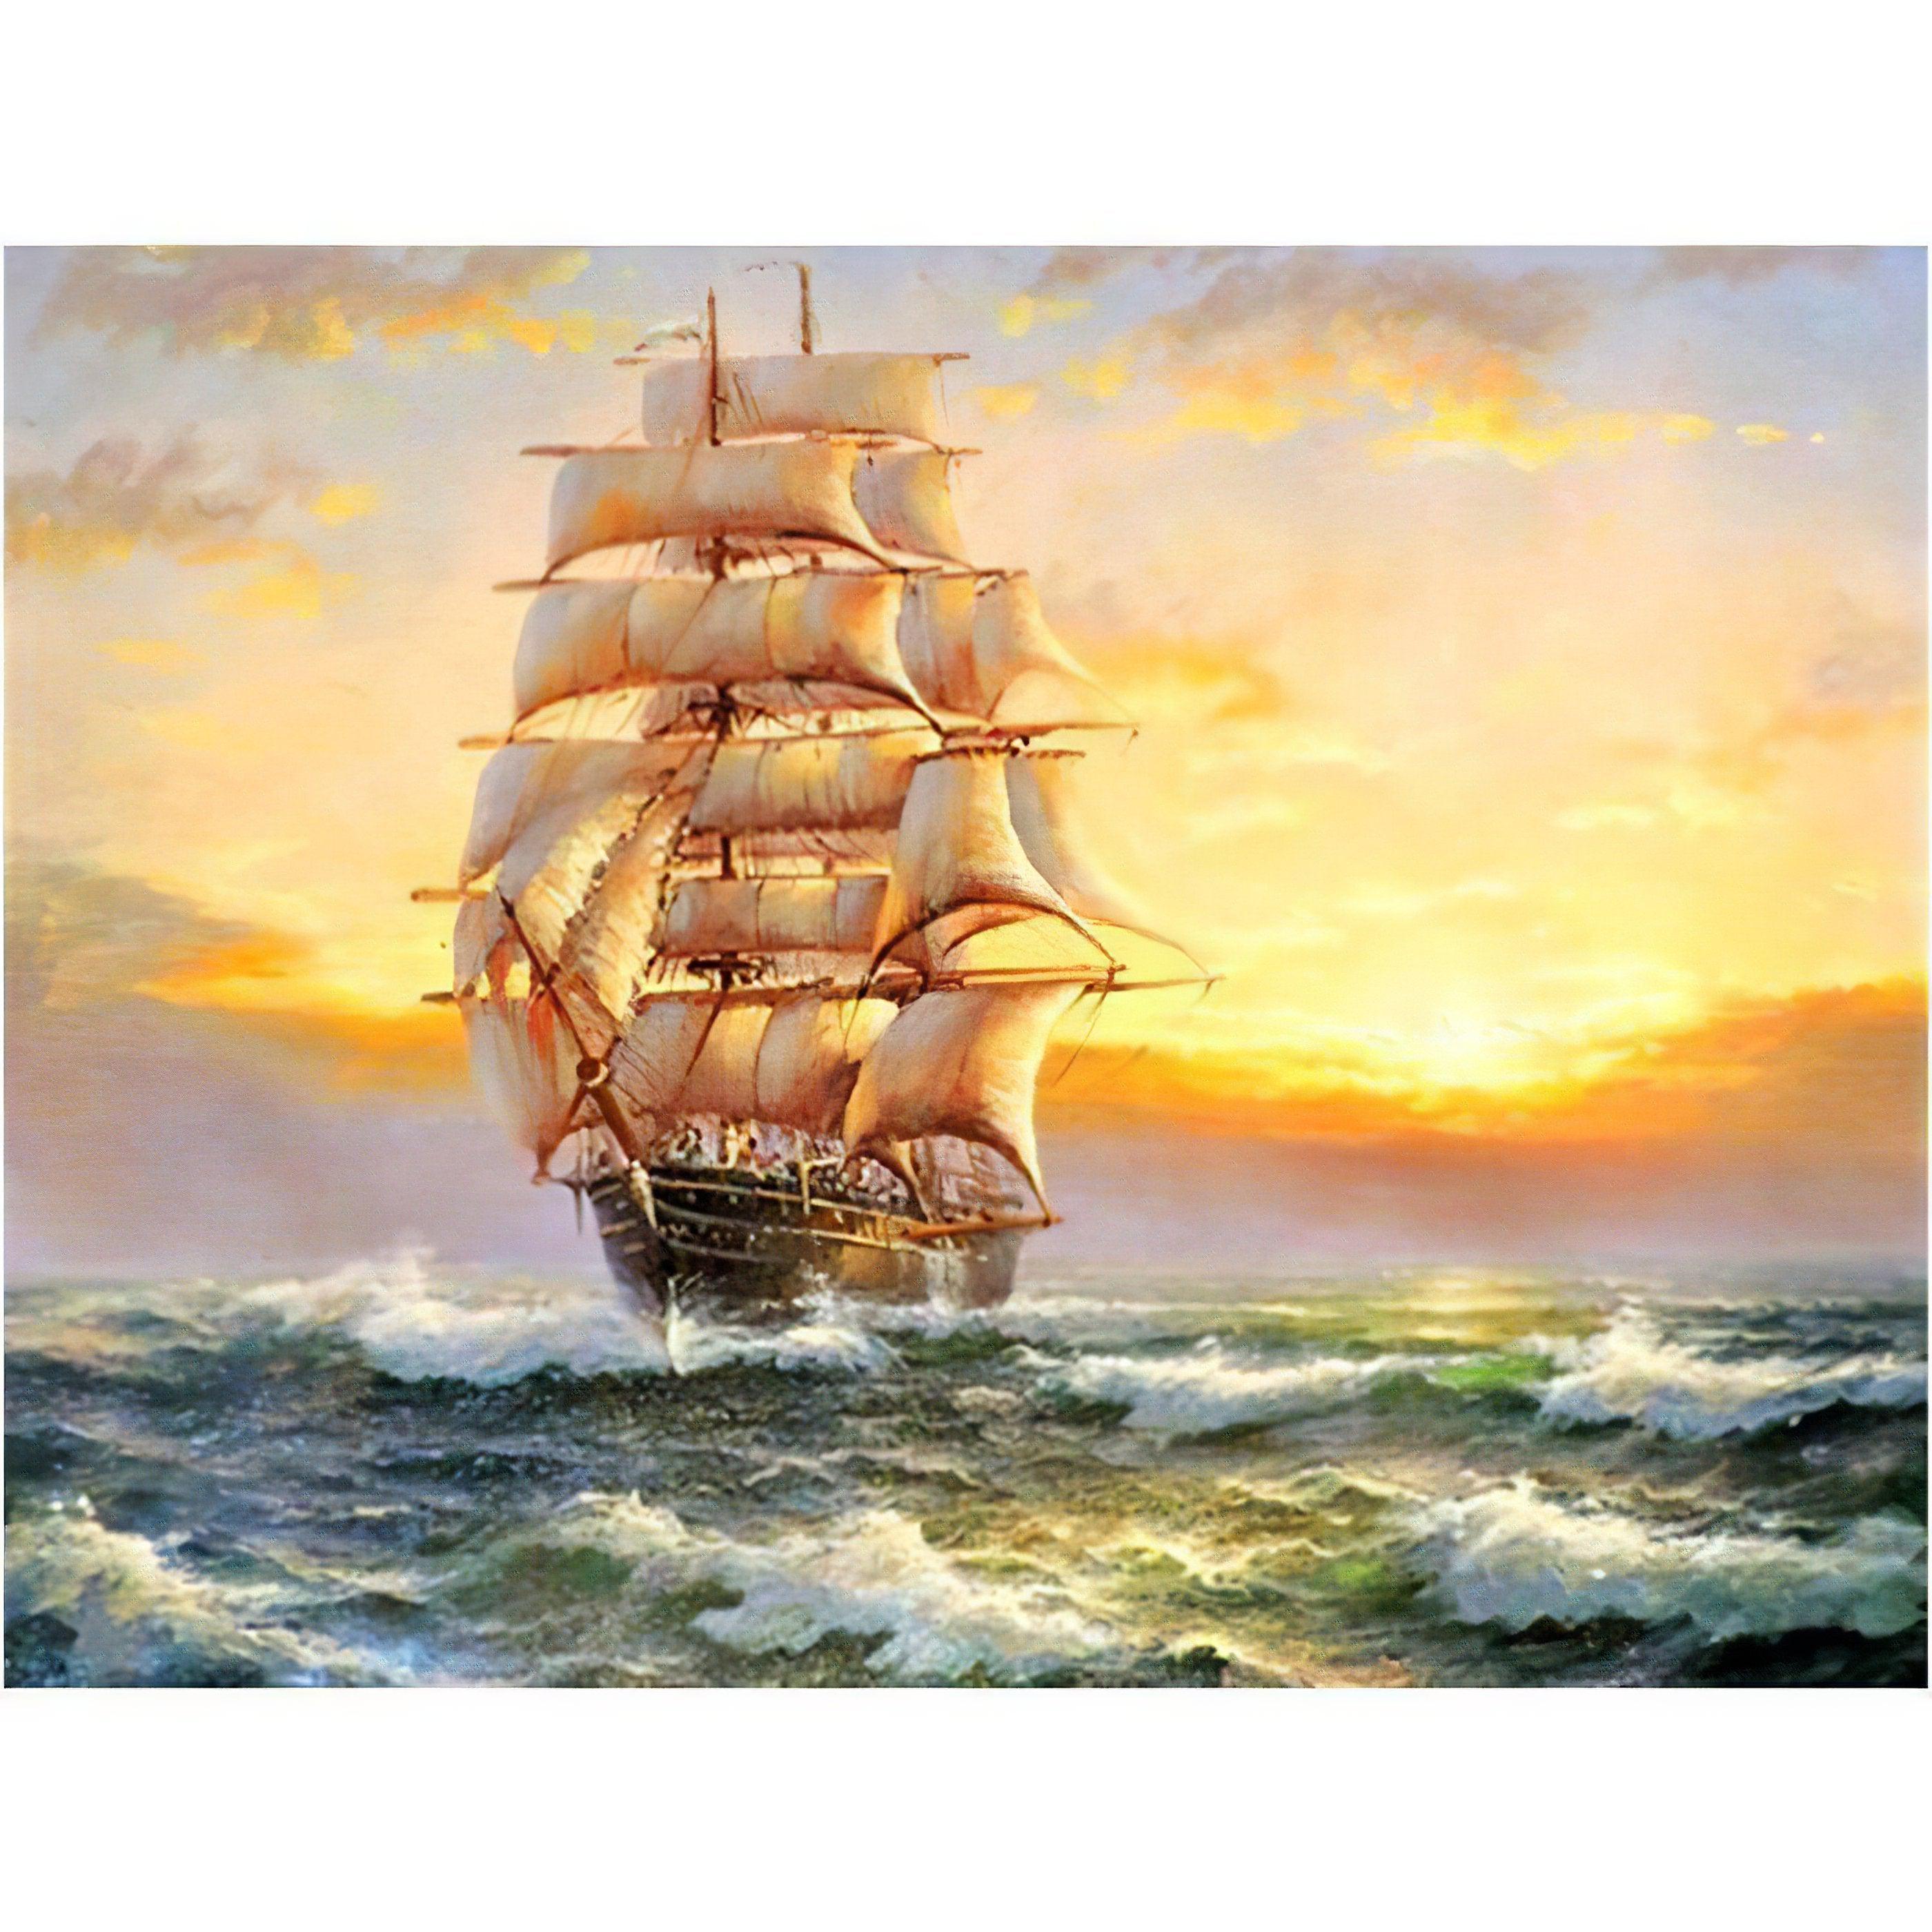 Set sail on an adventurous journey with a vibrant depiction of a sailing boat in vast ocean.Sailing Boat - Diamondartlove